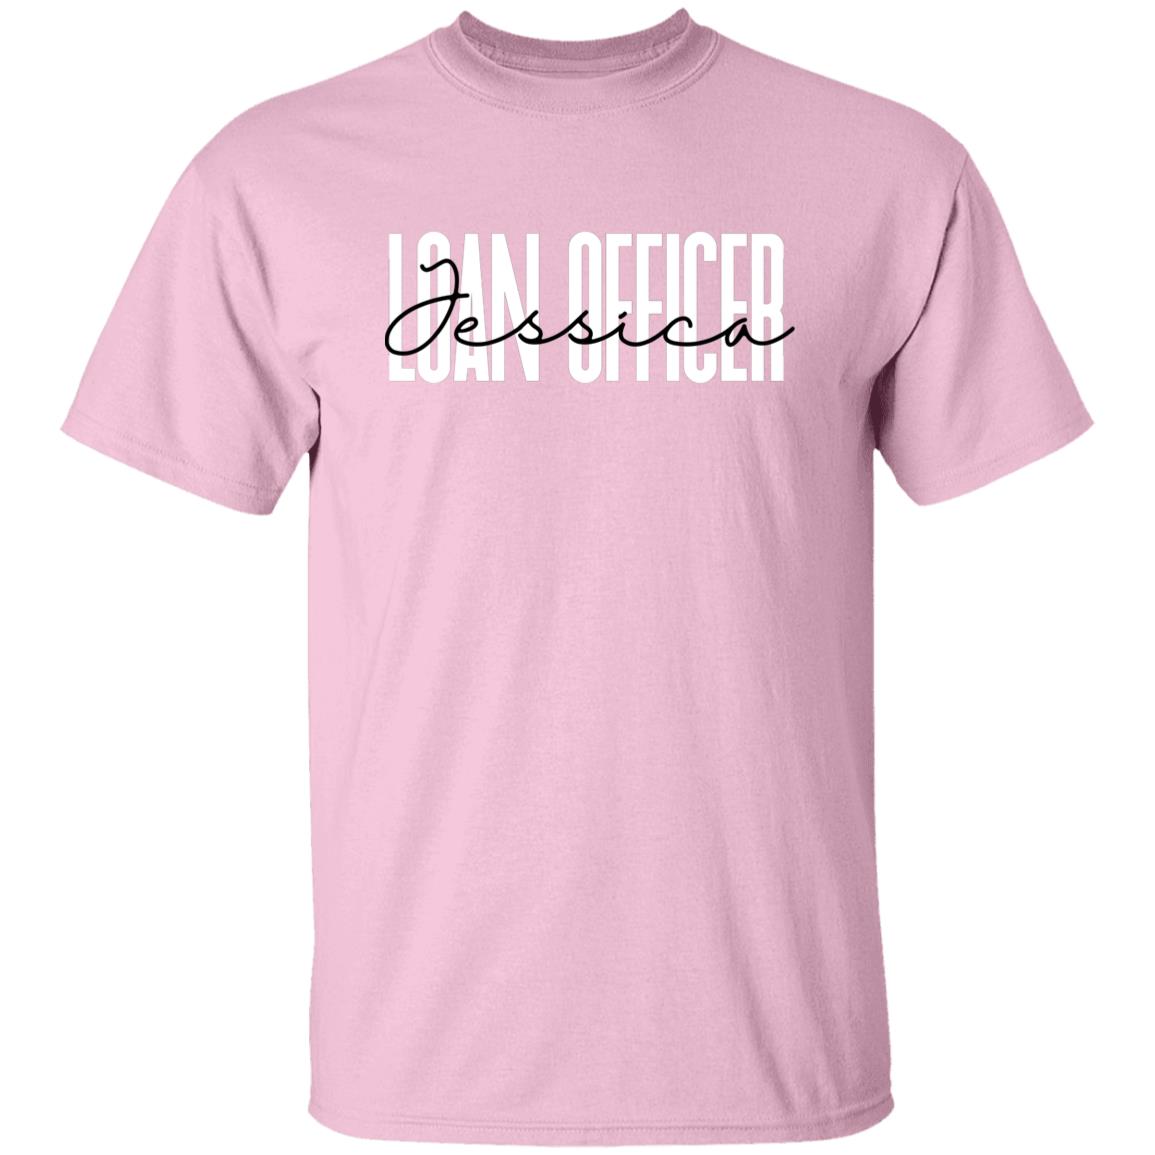 Personalized Loan officer T-Shirt gift Custom name Real Estate Mortgage Lender Unisex Tee Sand Pink Blue-Family-Gift-Planet